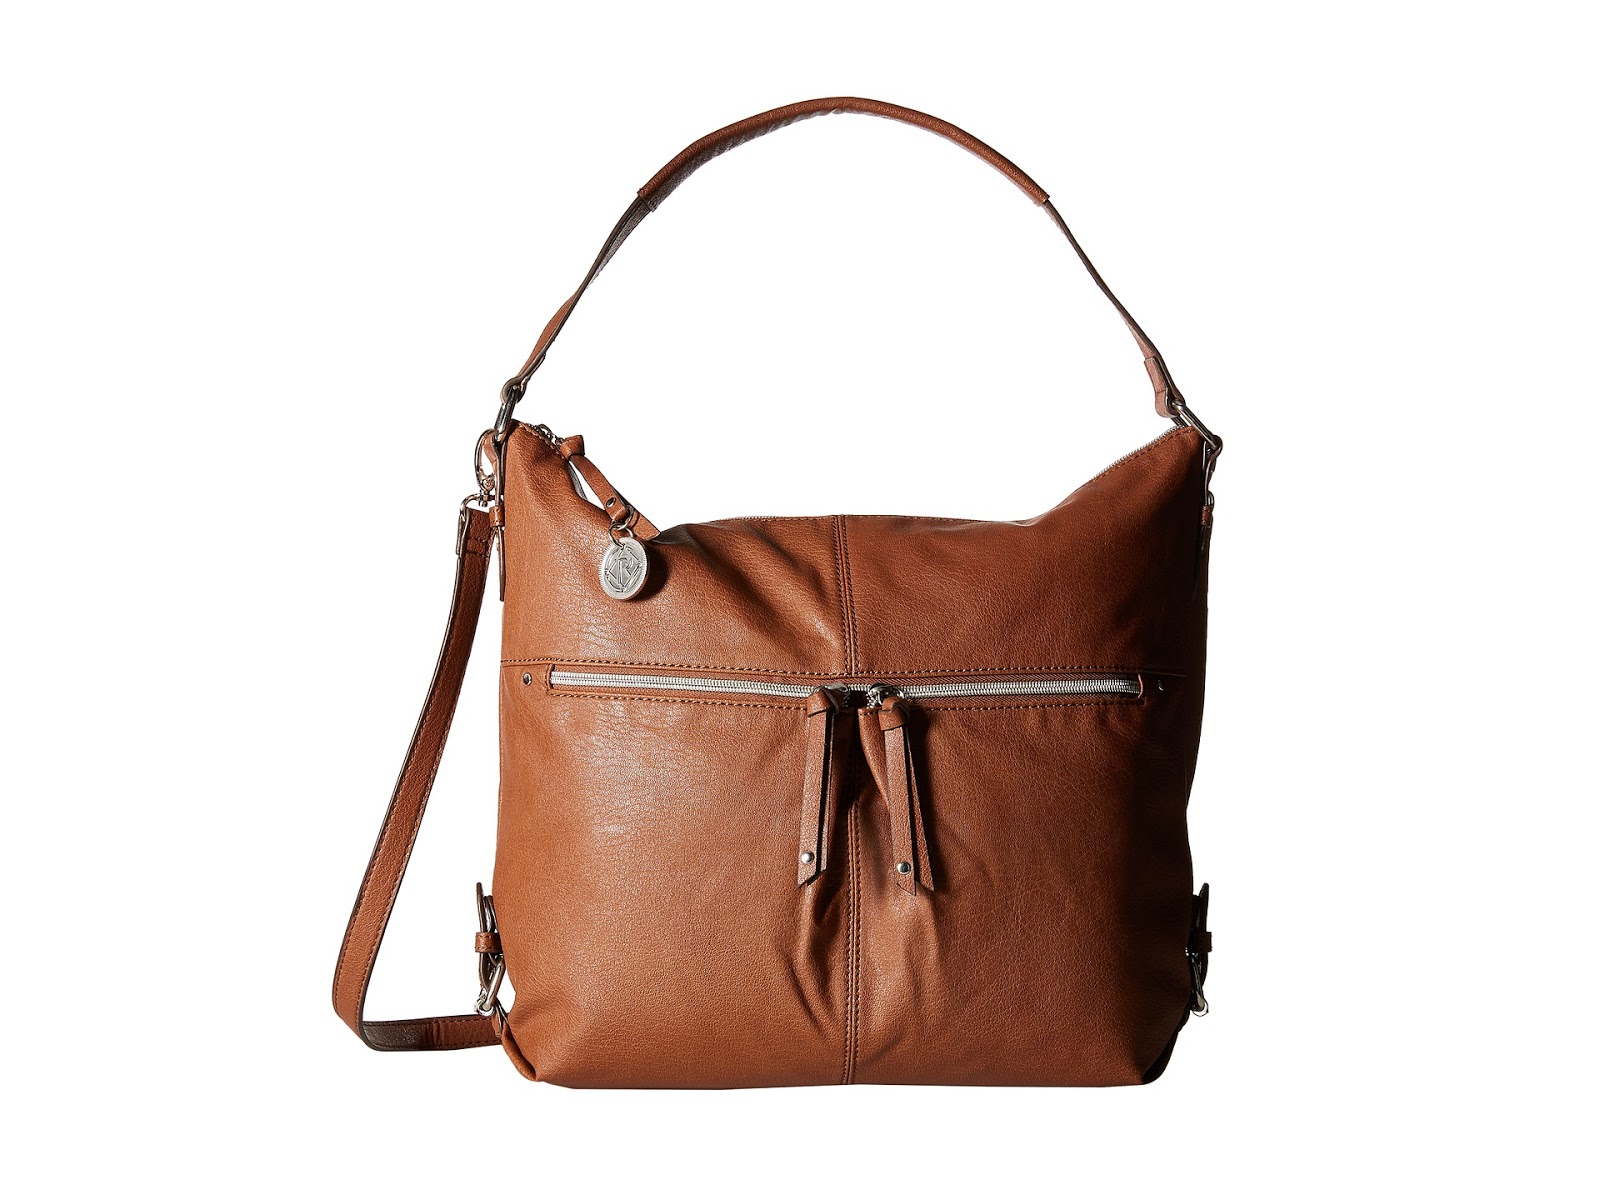 USA Boutique: Relic by Fossil Relic Finley Hobo Crossbody - Camel Brown